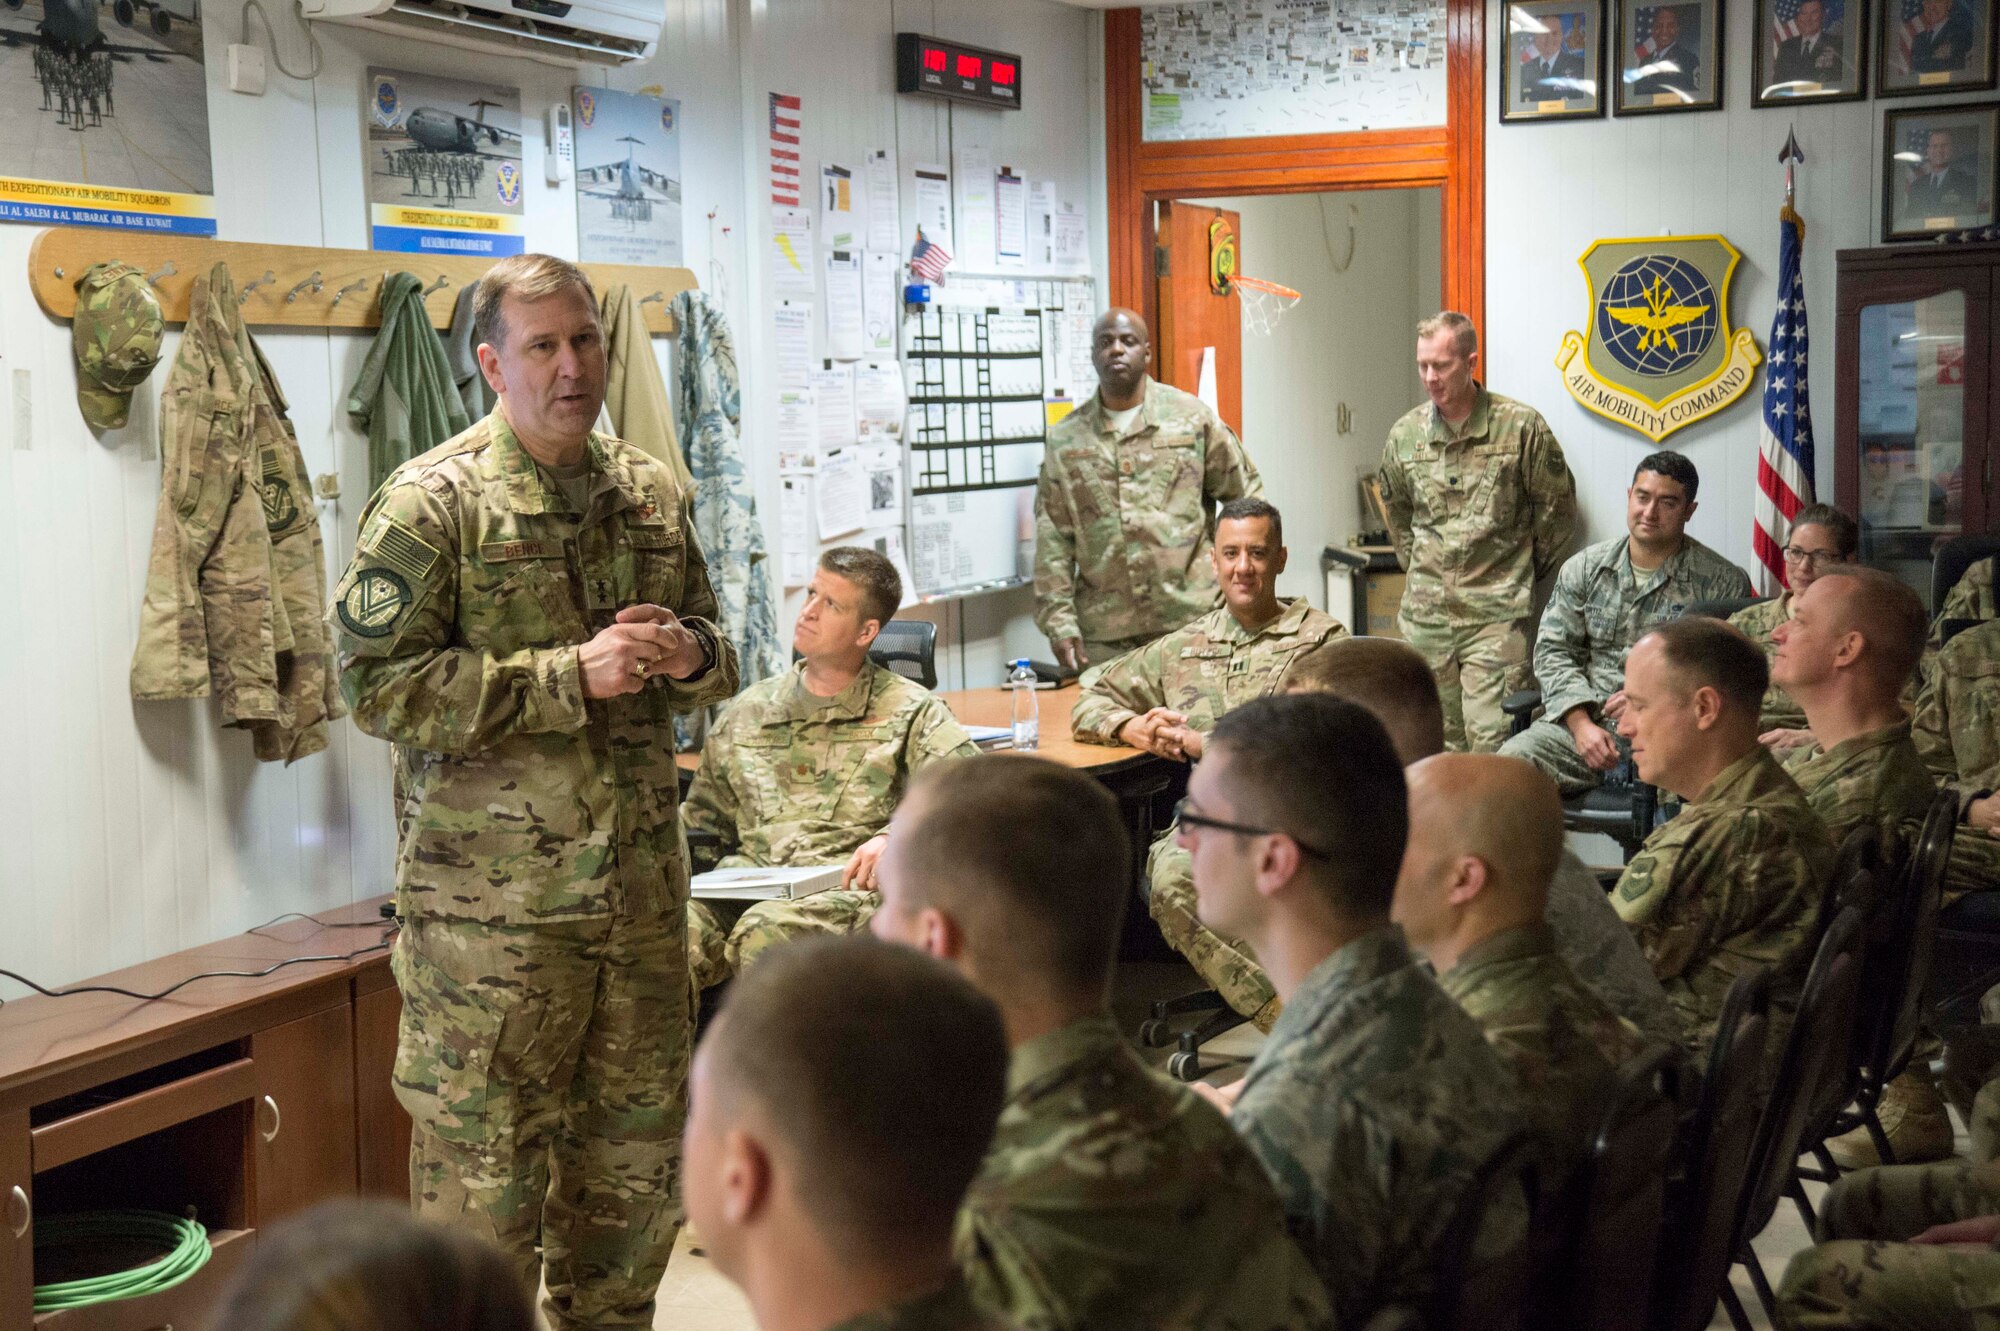 The Air Force Expeditionary Center provides advanced mobility and combat support training and education and has direct oversight for transportation and installation support, contingency response and partner capacity-building mission sets within the global mobility enterprise.